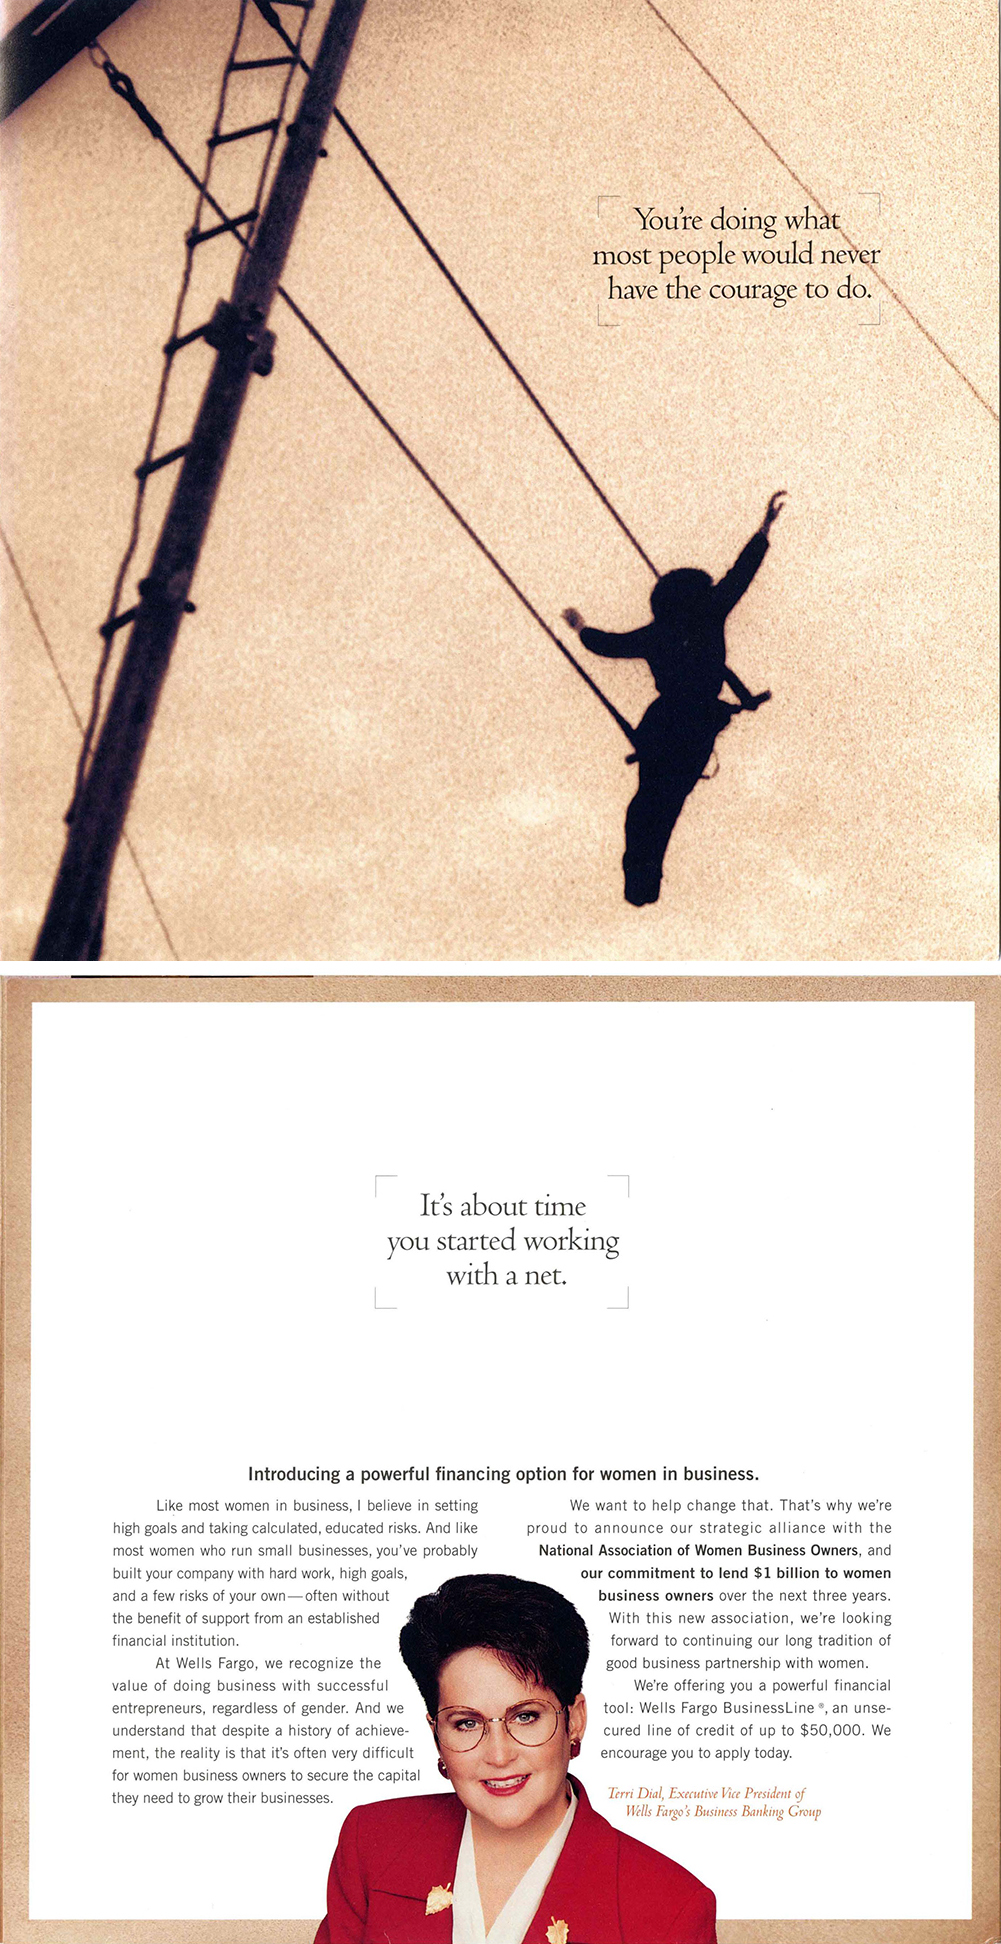 Top image: Woman Loan Program ad with the silhouette of a woman on a trapeze swing with tan background that reads: You’re doing what most people would never have the courage to do. Bottom image: Article featuring image of Terri Dial with short black hair and glasses wearing a red blazer. Title reads: It’s about time you started working with a net. Image link will enlarge image.